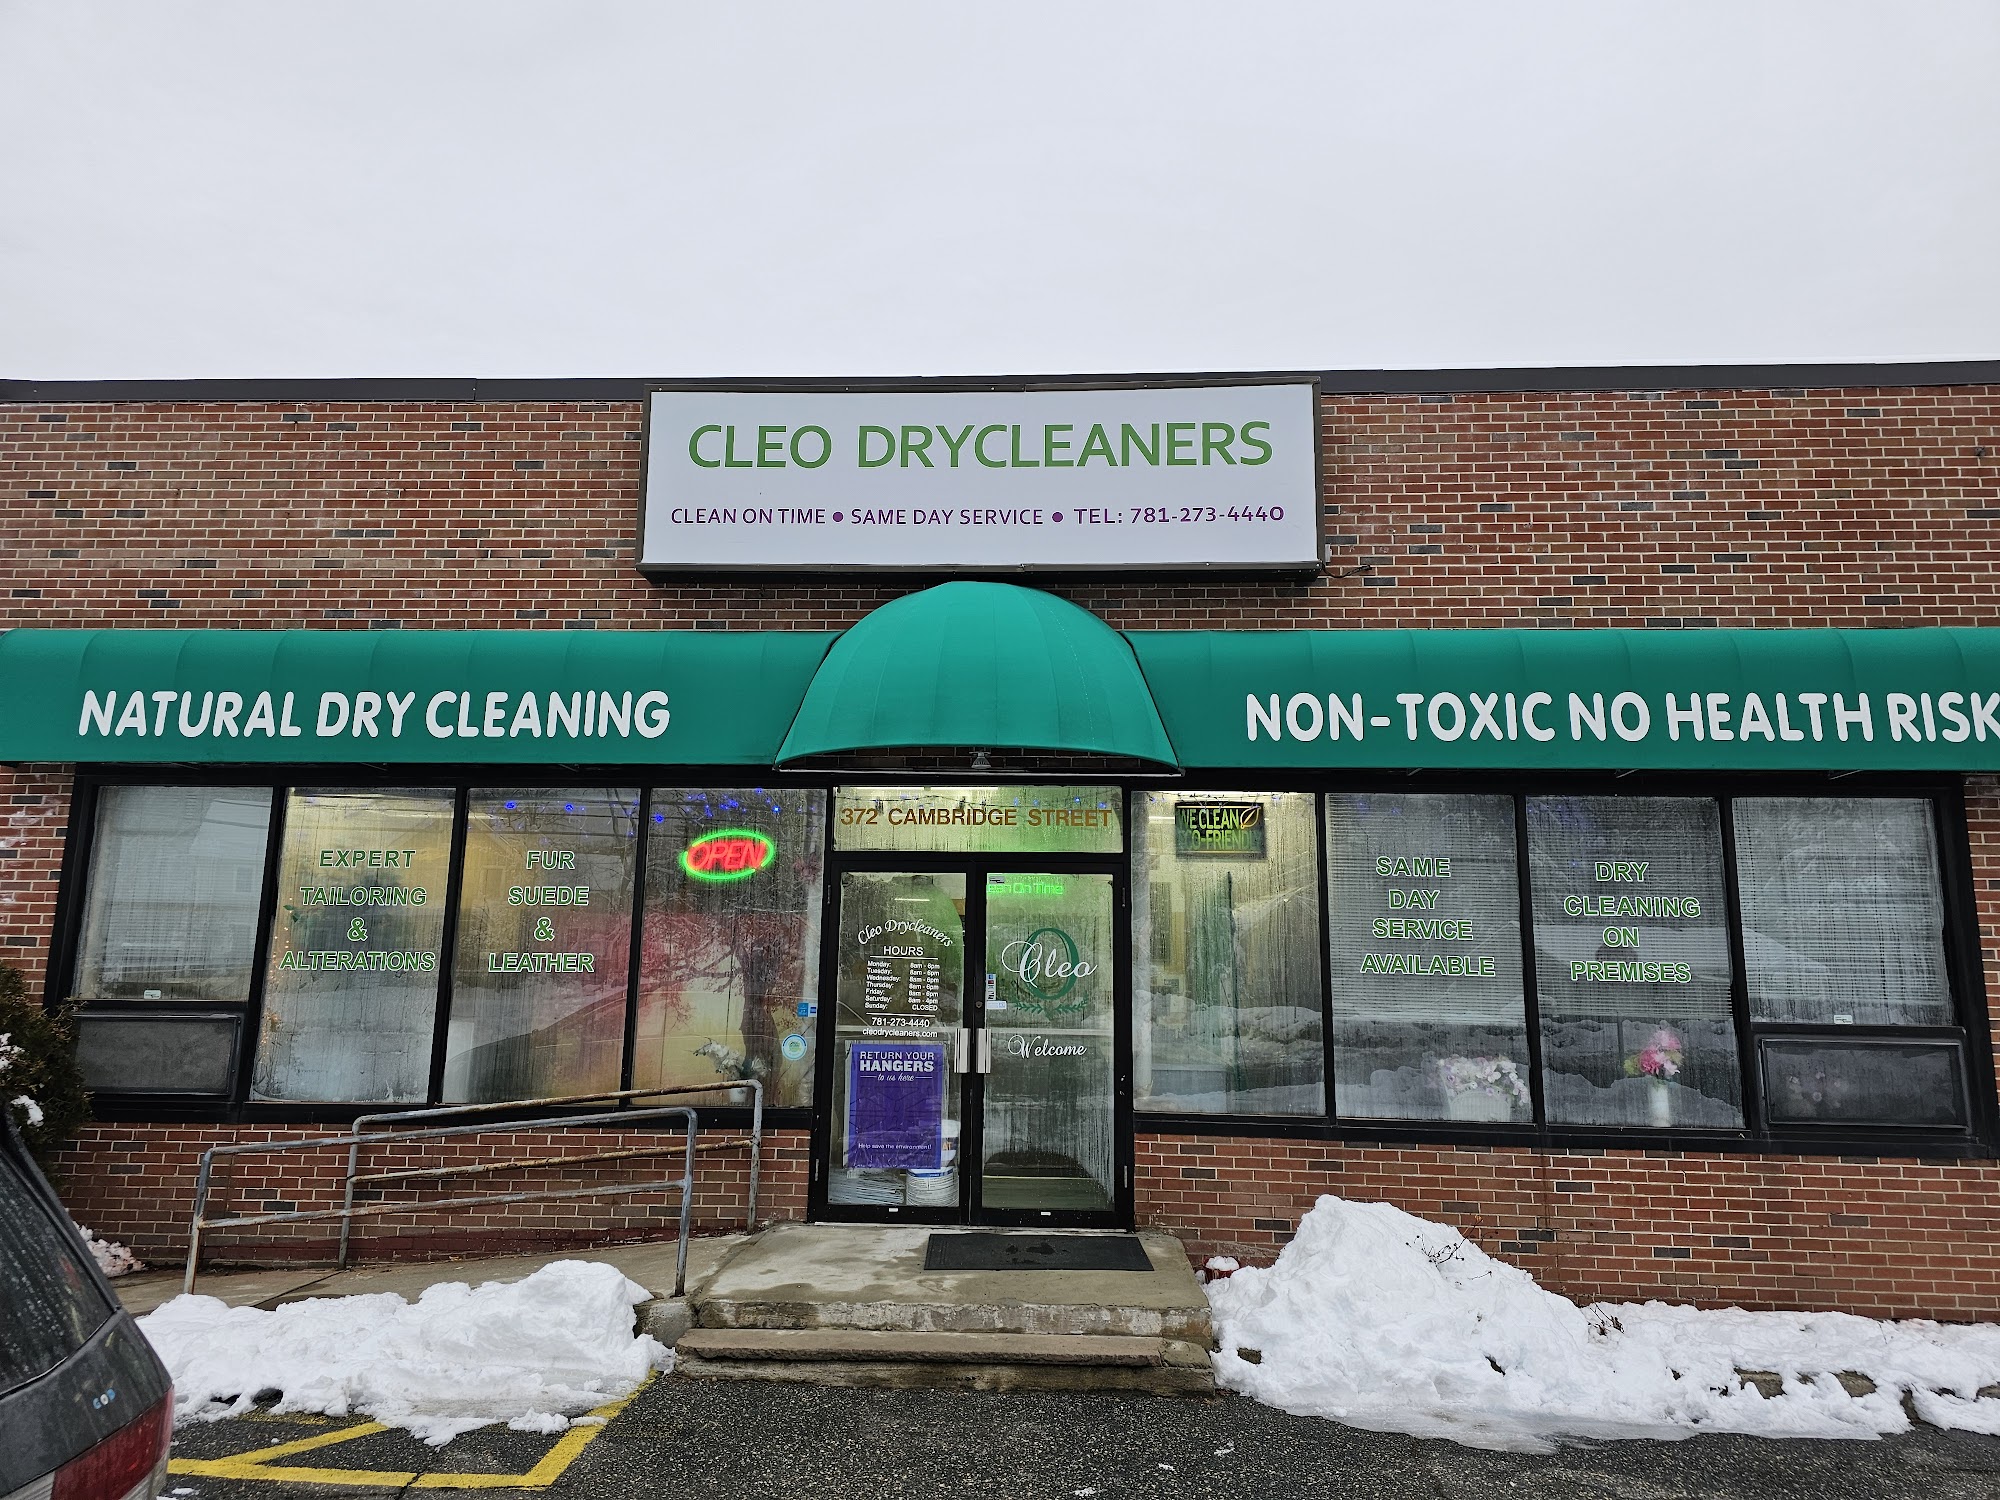 Cleo Drycleaners